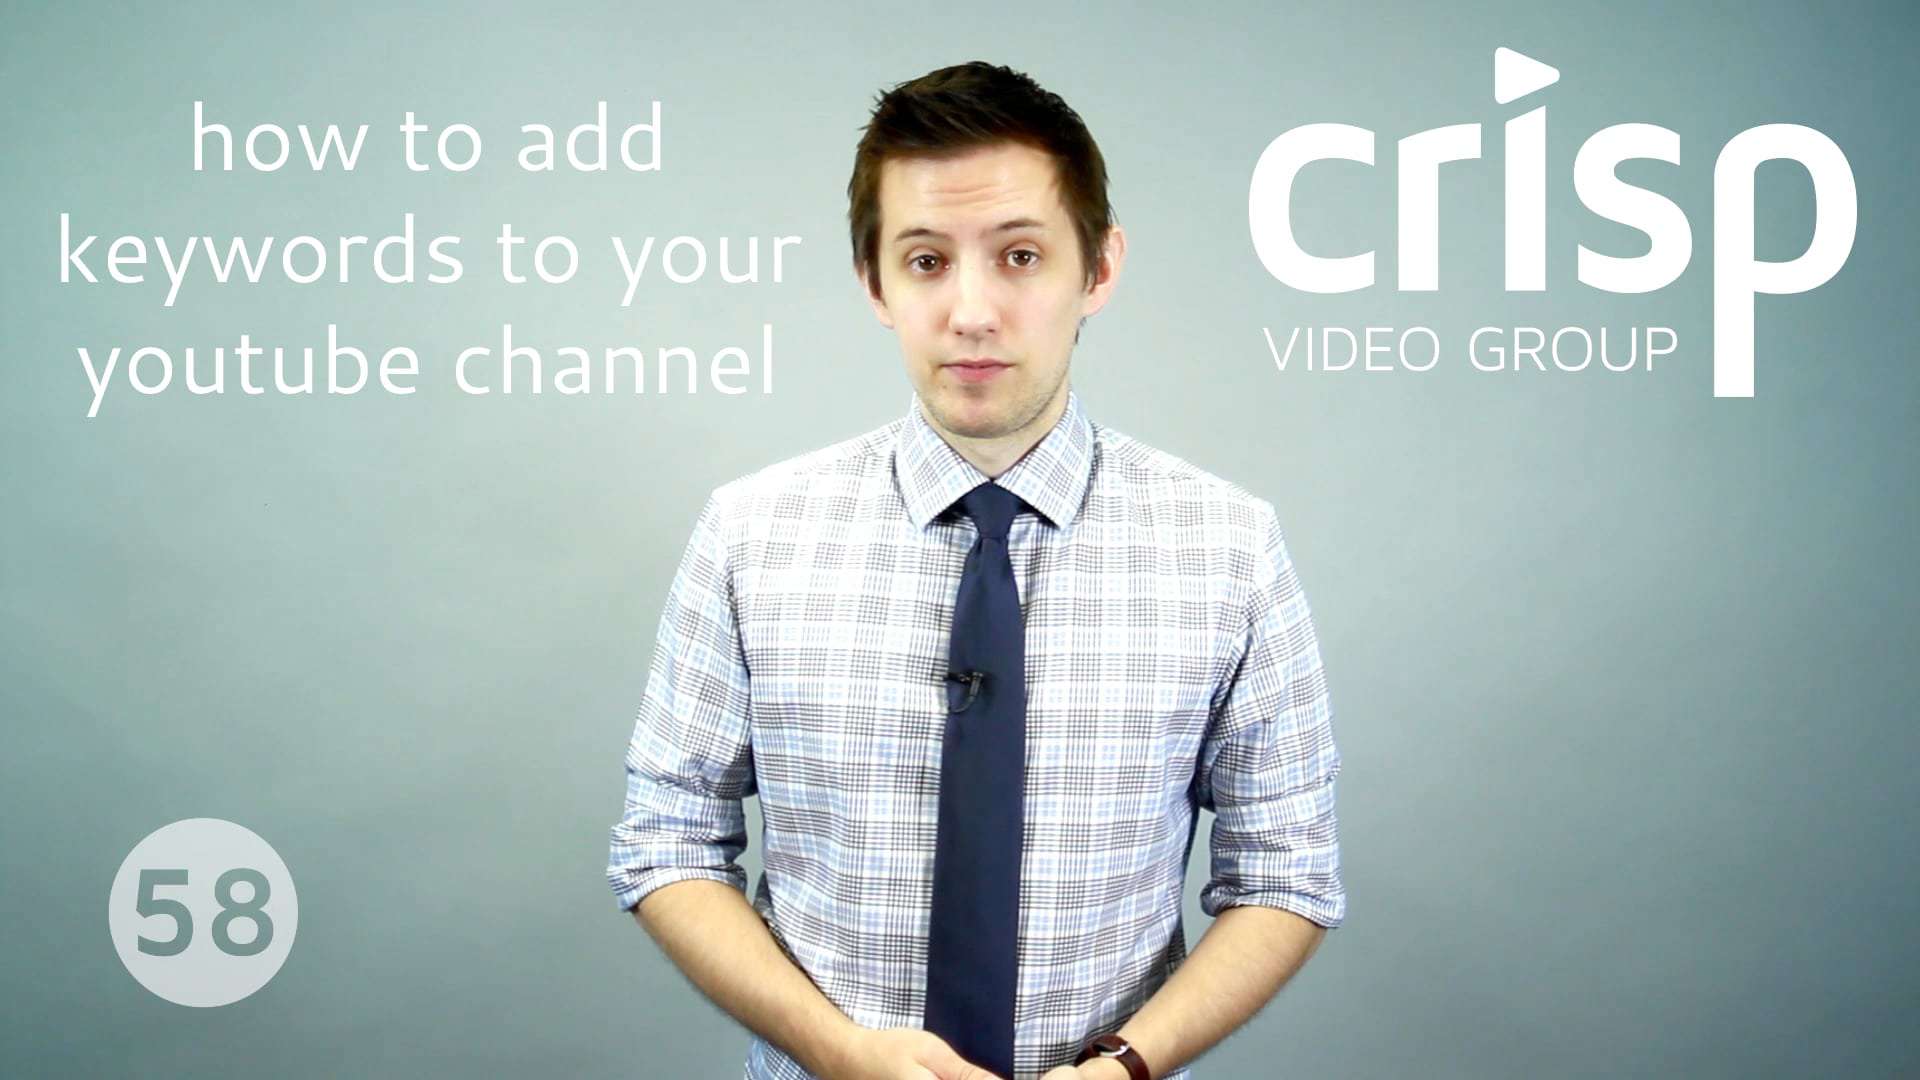 How to Add Keywords to Your YouTube Channel | Crisp Video